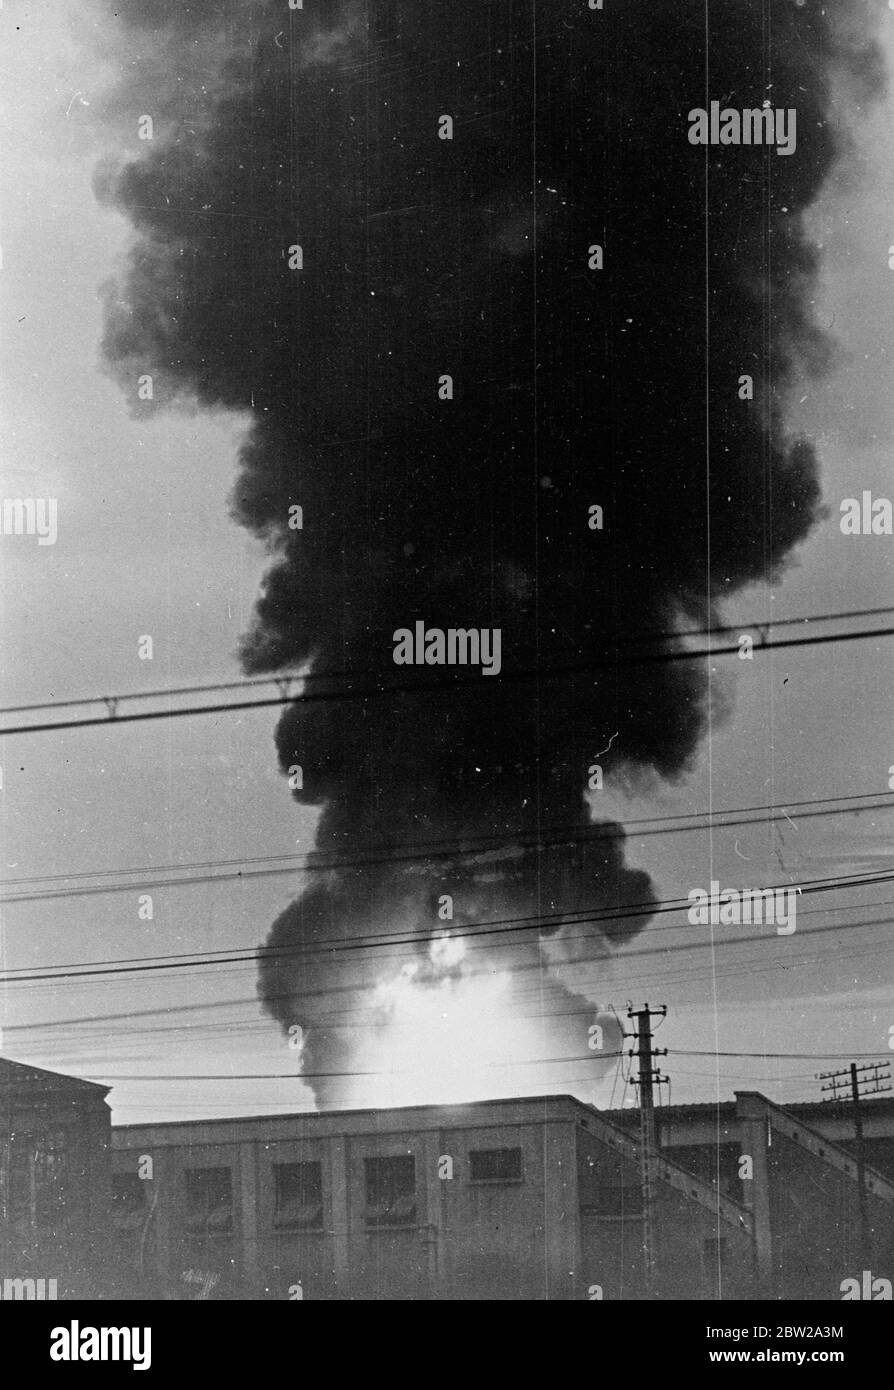 Japanese at the gates of Nanking. The fall of Nanking, the Chinese capital, is now reported to be imminent. It is said that Chinese resistance has completely collapsed and that the Japanese forces are now waiting outside the walls of the city to allow the remaining Chinese troops to evacuate before a formal entry is made. Photo shows, flames and smoke shooting skyward from a doomed building as the Japanese blasted their way towards Nanking. 7 December 1937 Stock Photo